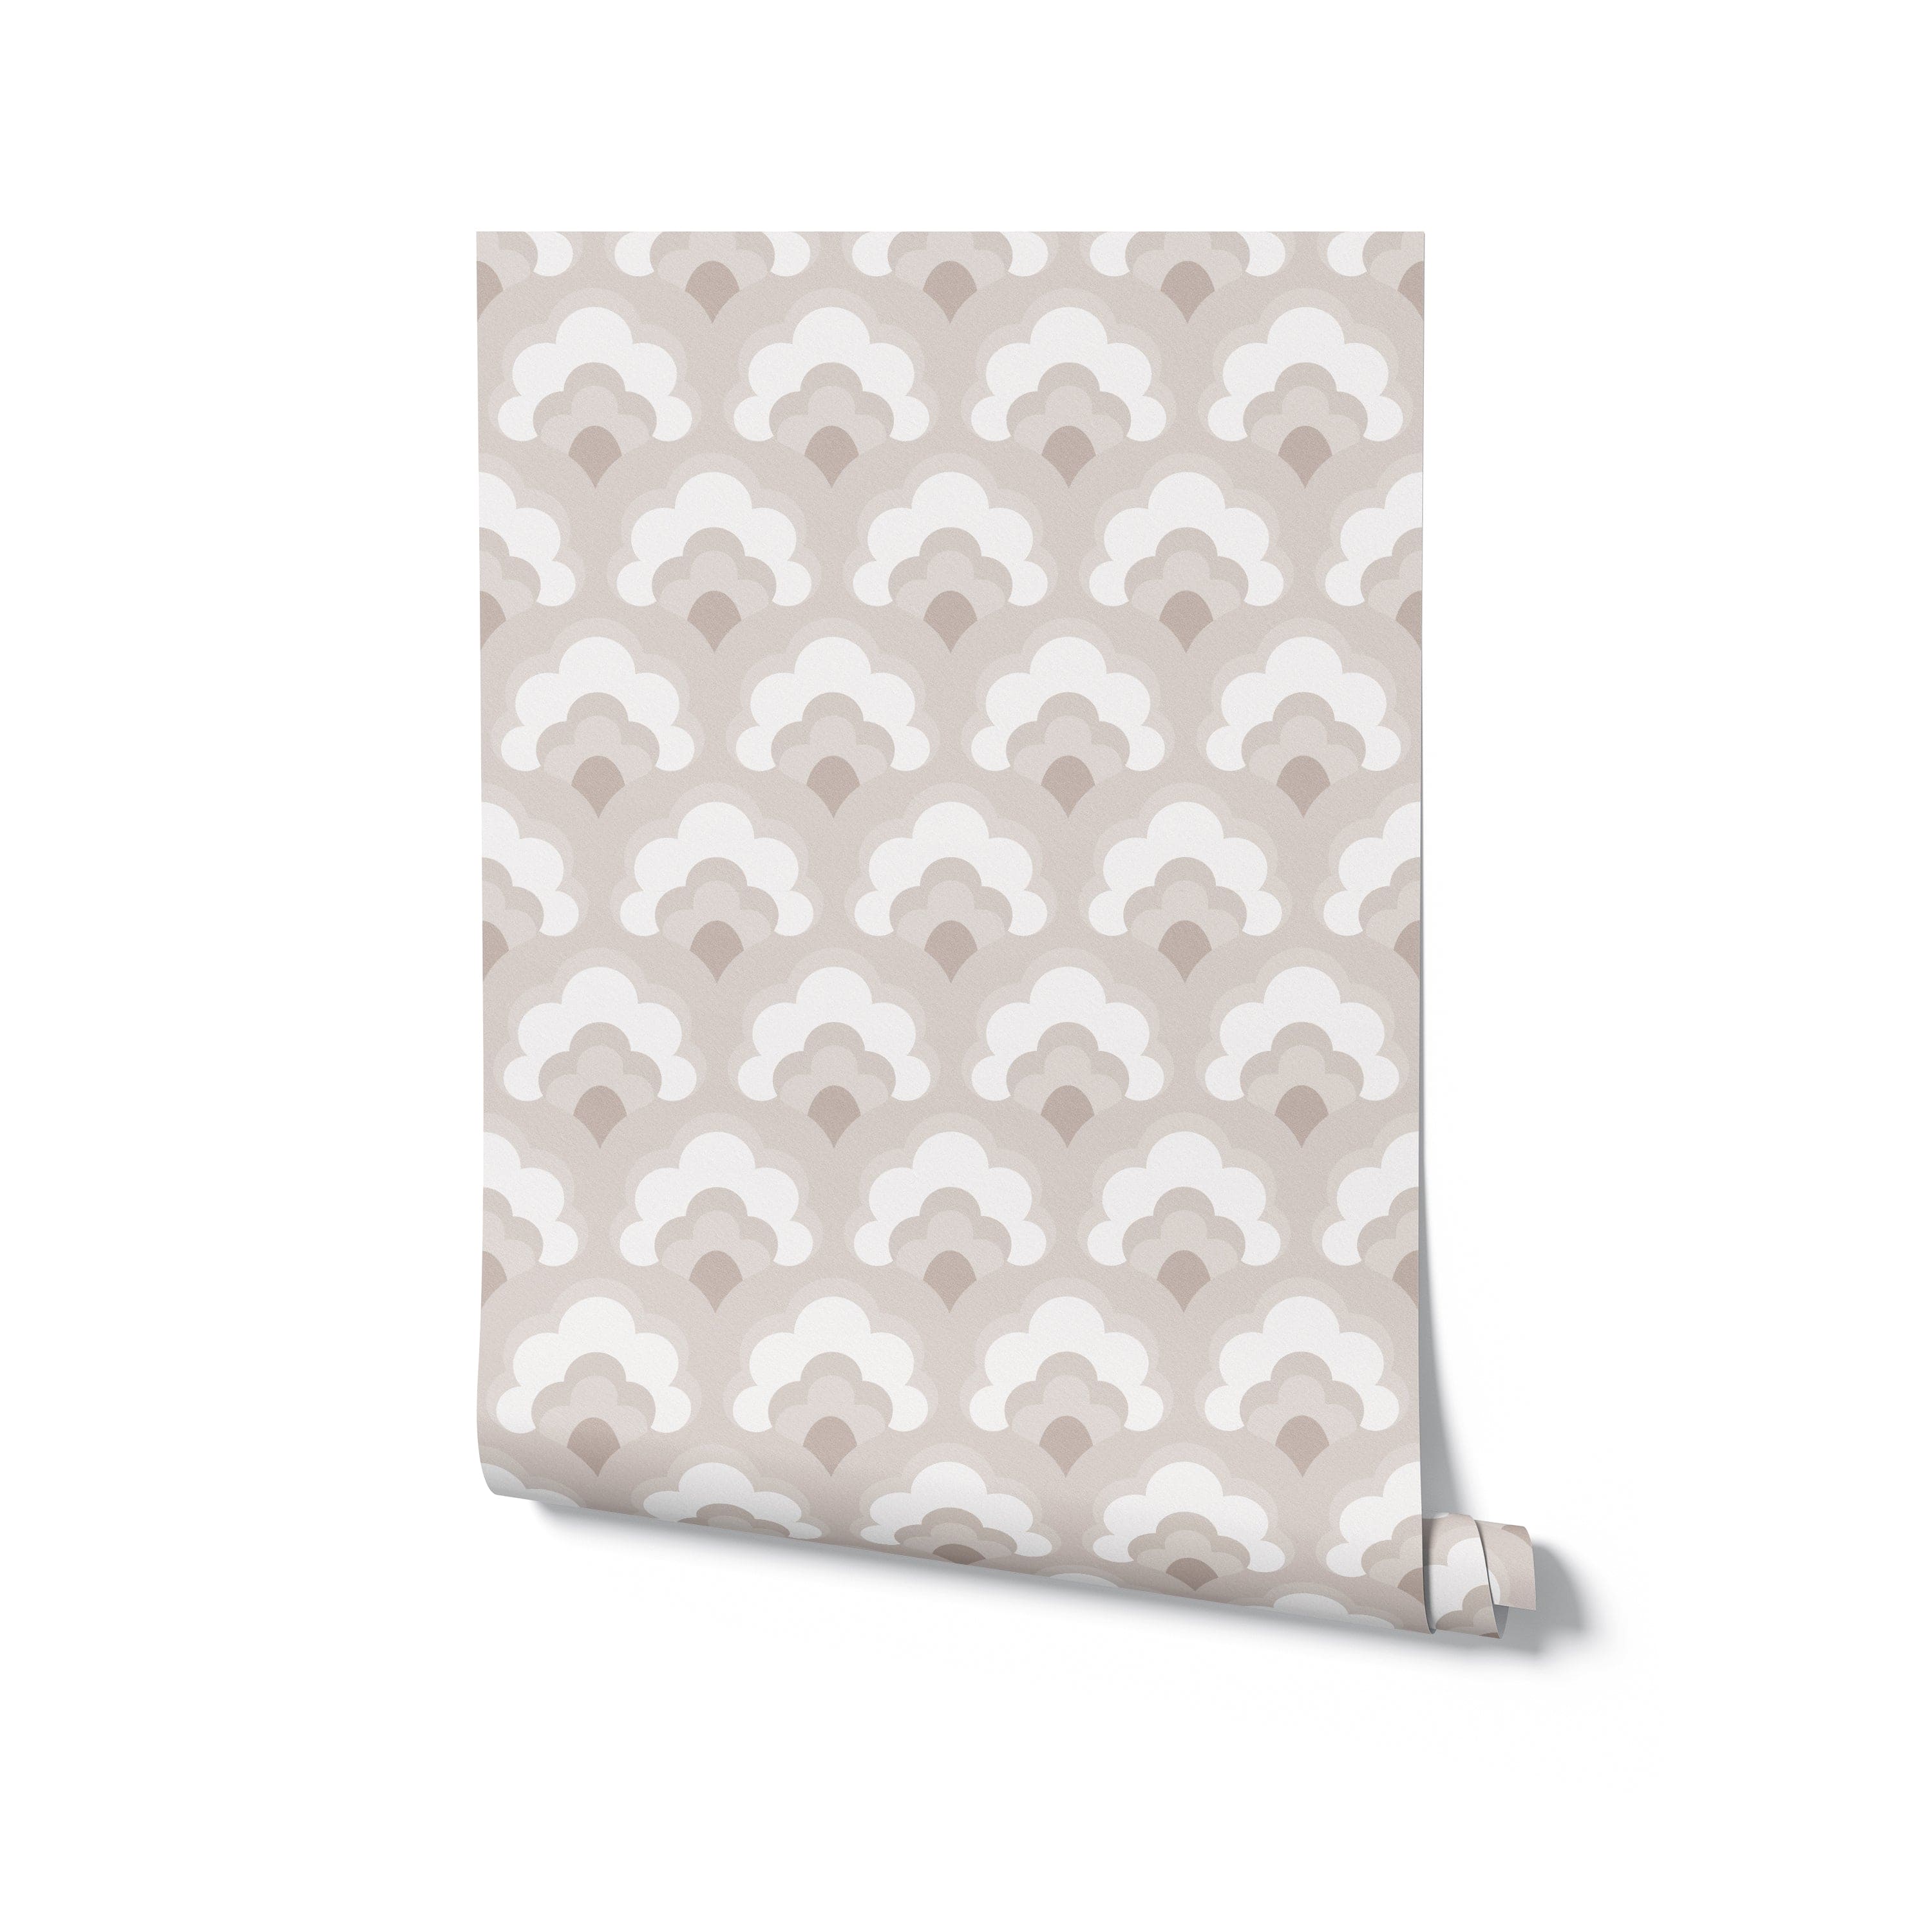 A roll of 'Scallop Mosaic Wallpaper' partially unrolled, displaying the elegant beige and white scalloped pattern. This image highlights the wallpaper's potential to enhance home decor with its graceful and timeless design.